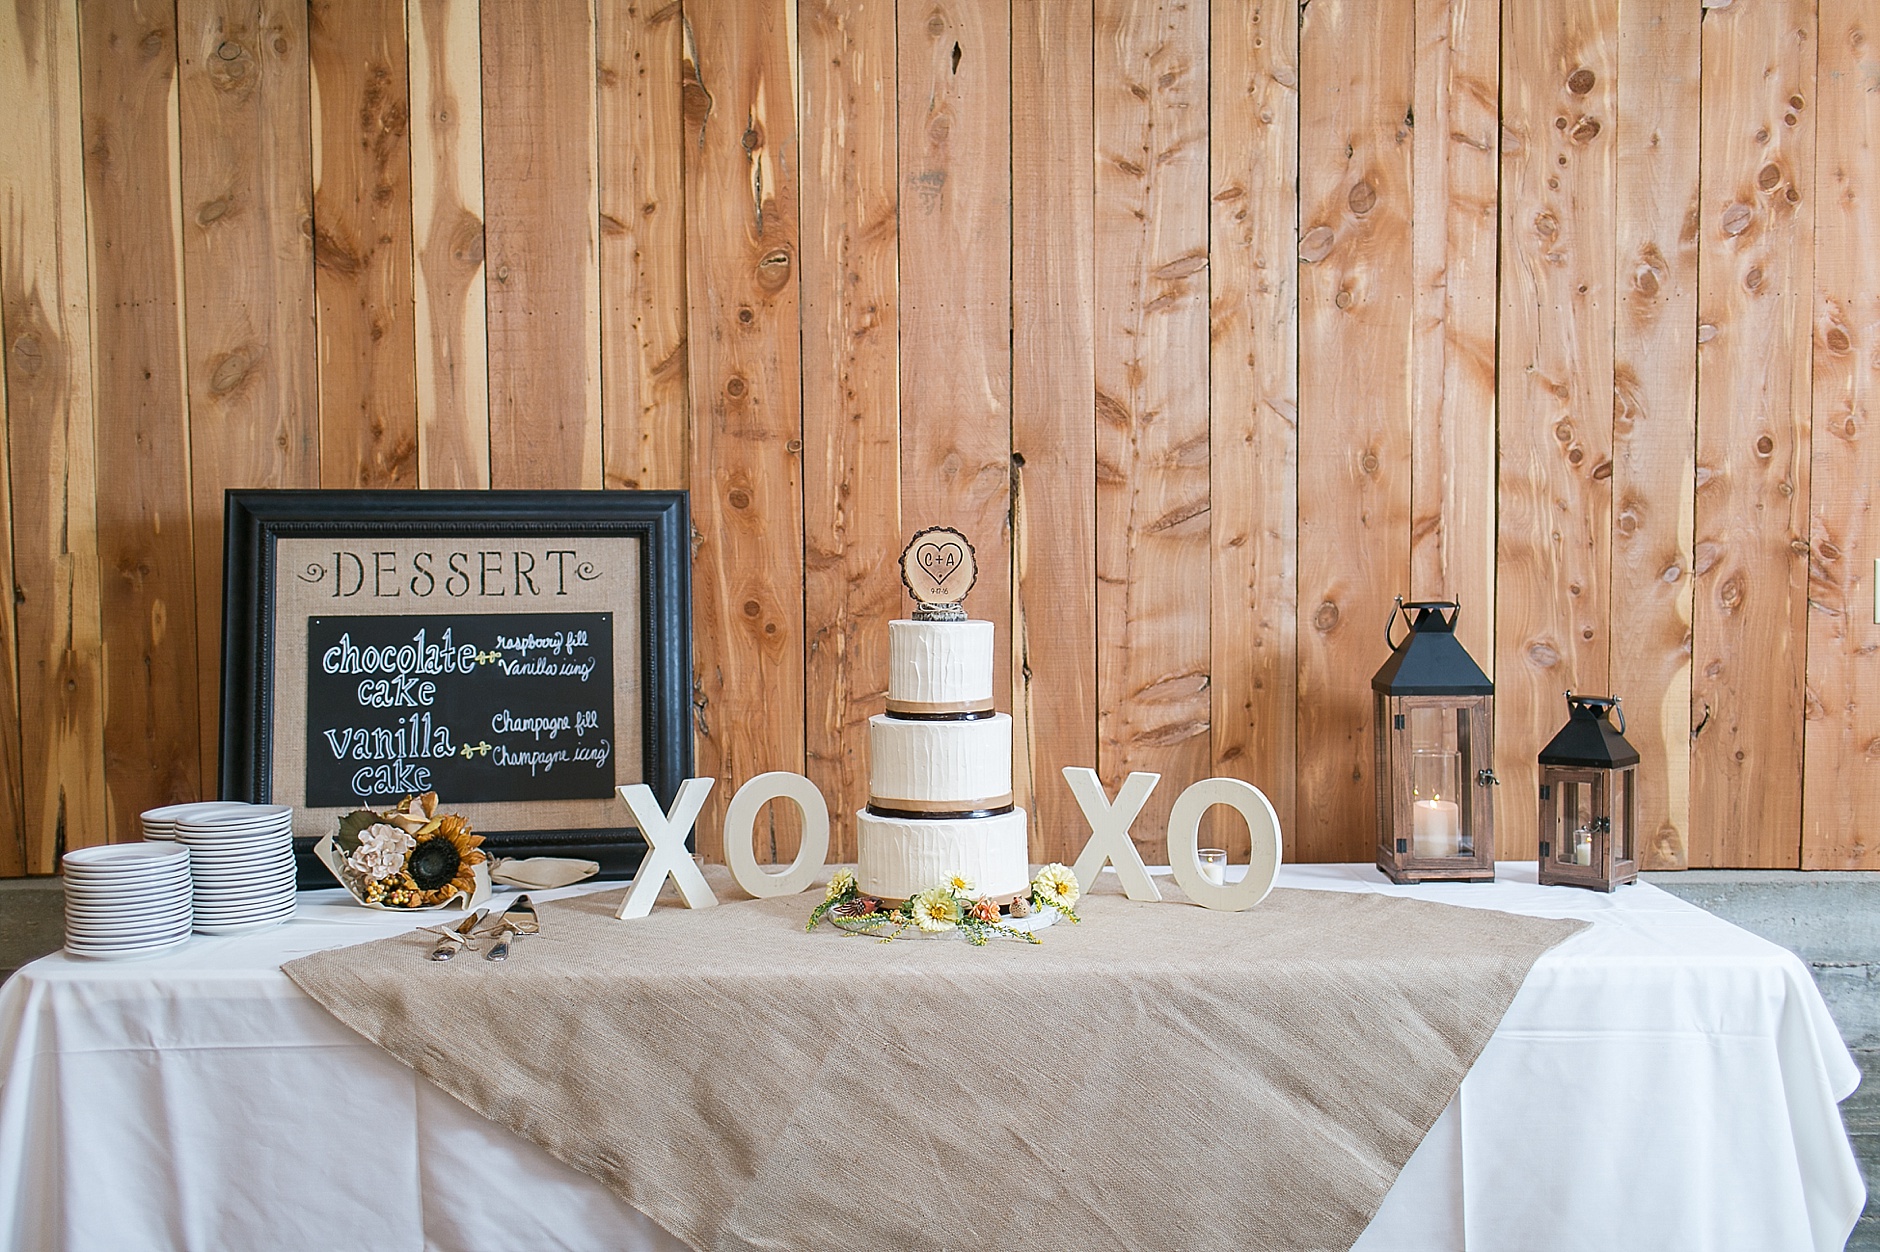 A Haue Valley Summer Wedding in St. Louis, Missouri by Rachael Houser Photography